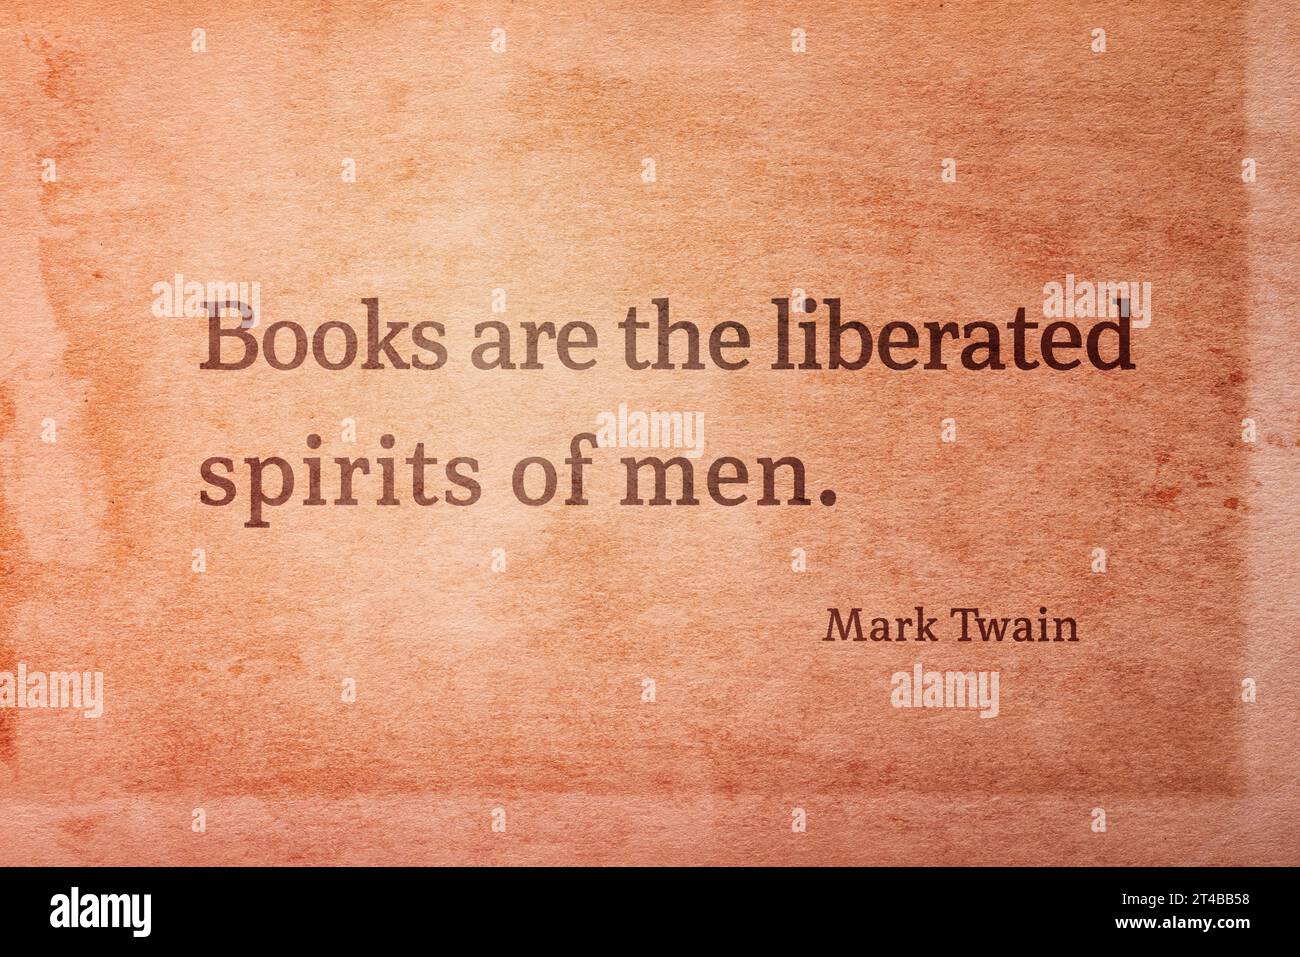 Books are the liberated spirits of men - famous American writer Mark Twain quote printed on vintage grunge paper Stock Photo